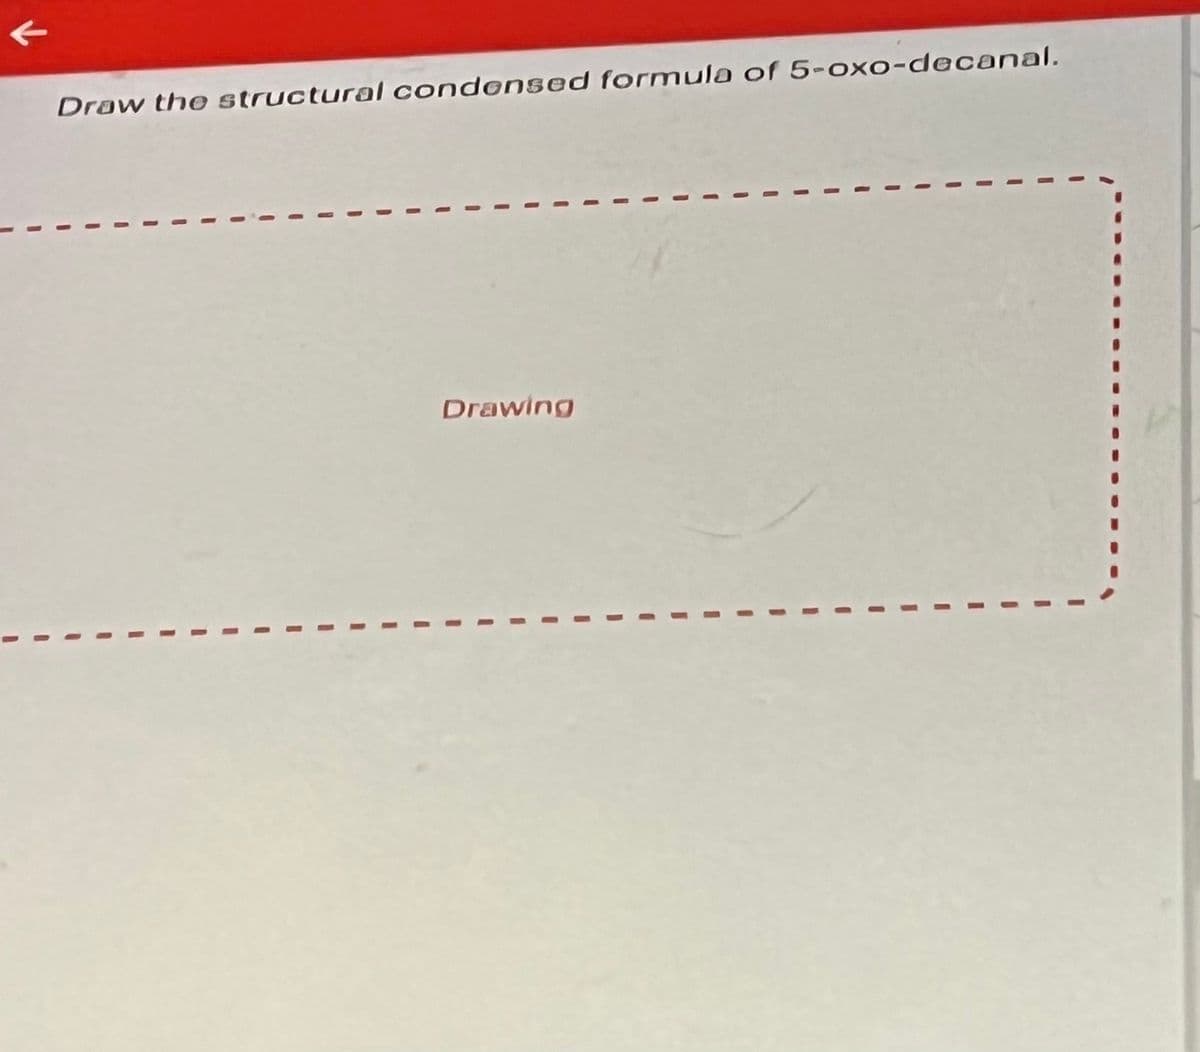 K
Draw the structural condensed formula of 5-oxo-decanal.
Drawing